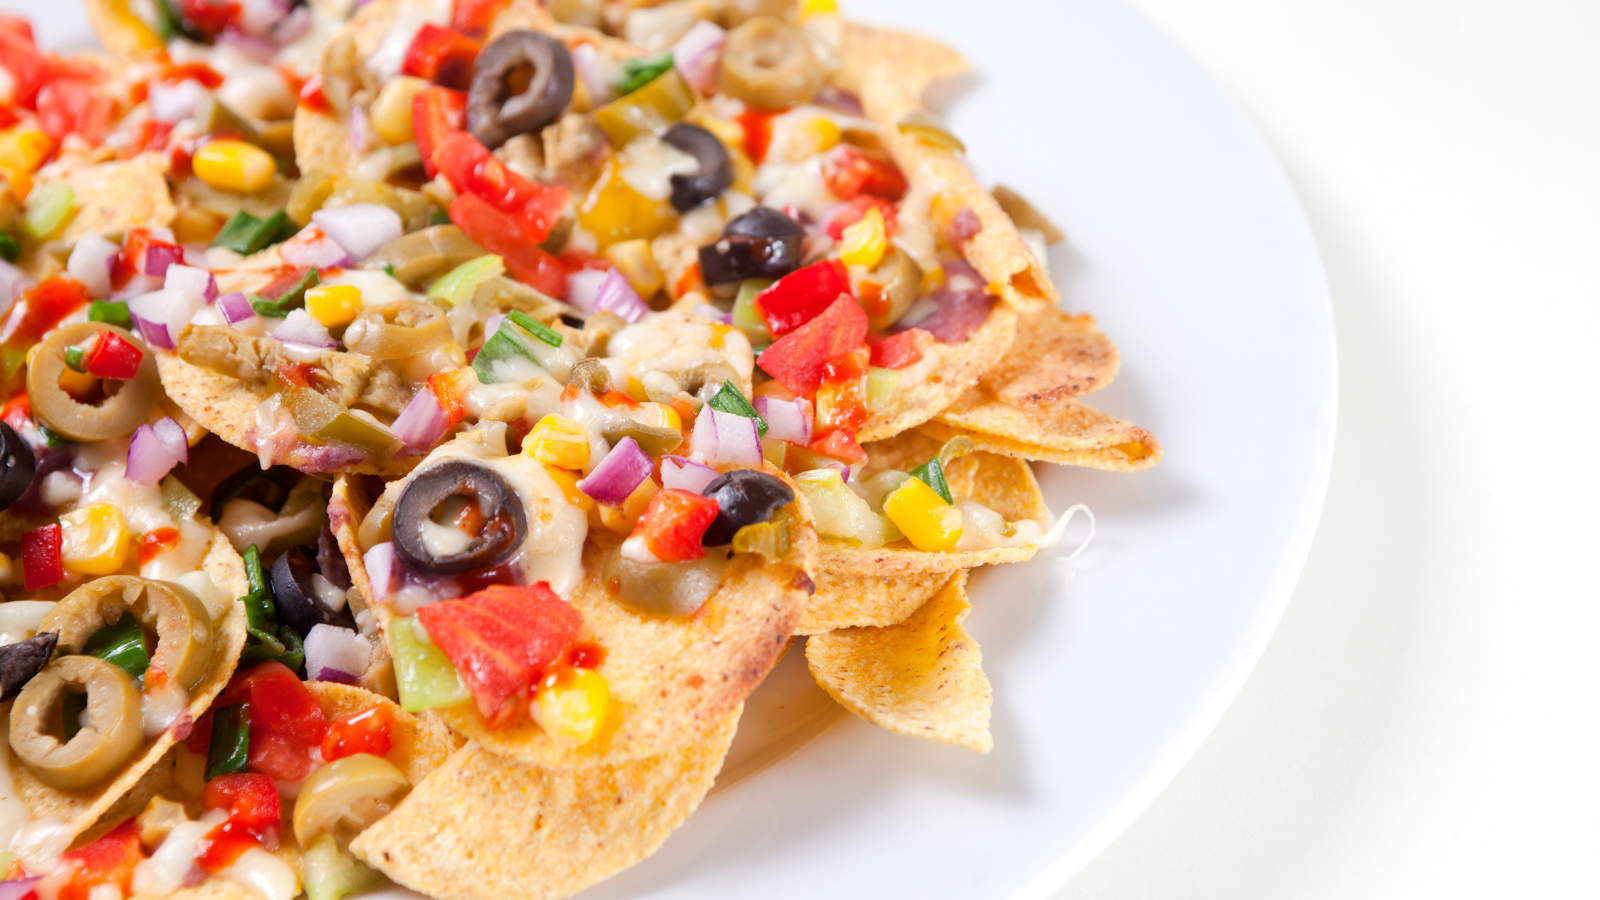 white plate half off the left side of image filled with tortilla chips covered in cheese, olives, corn, tomatoes, and more